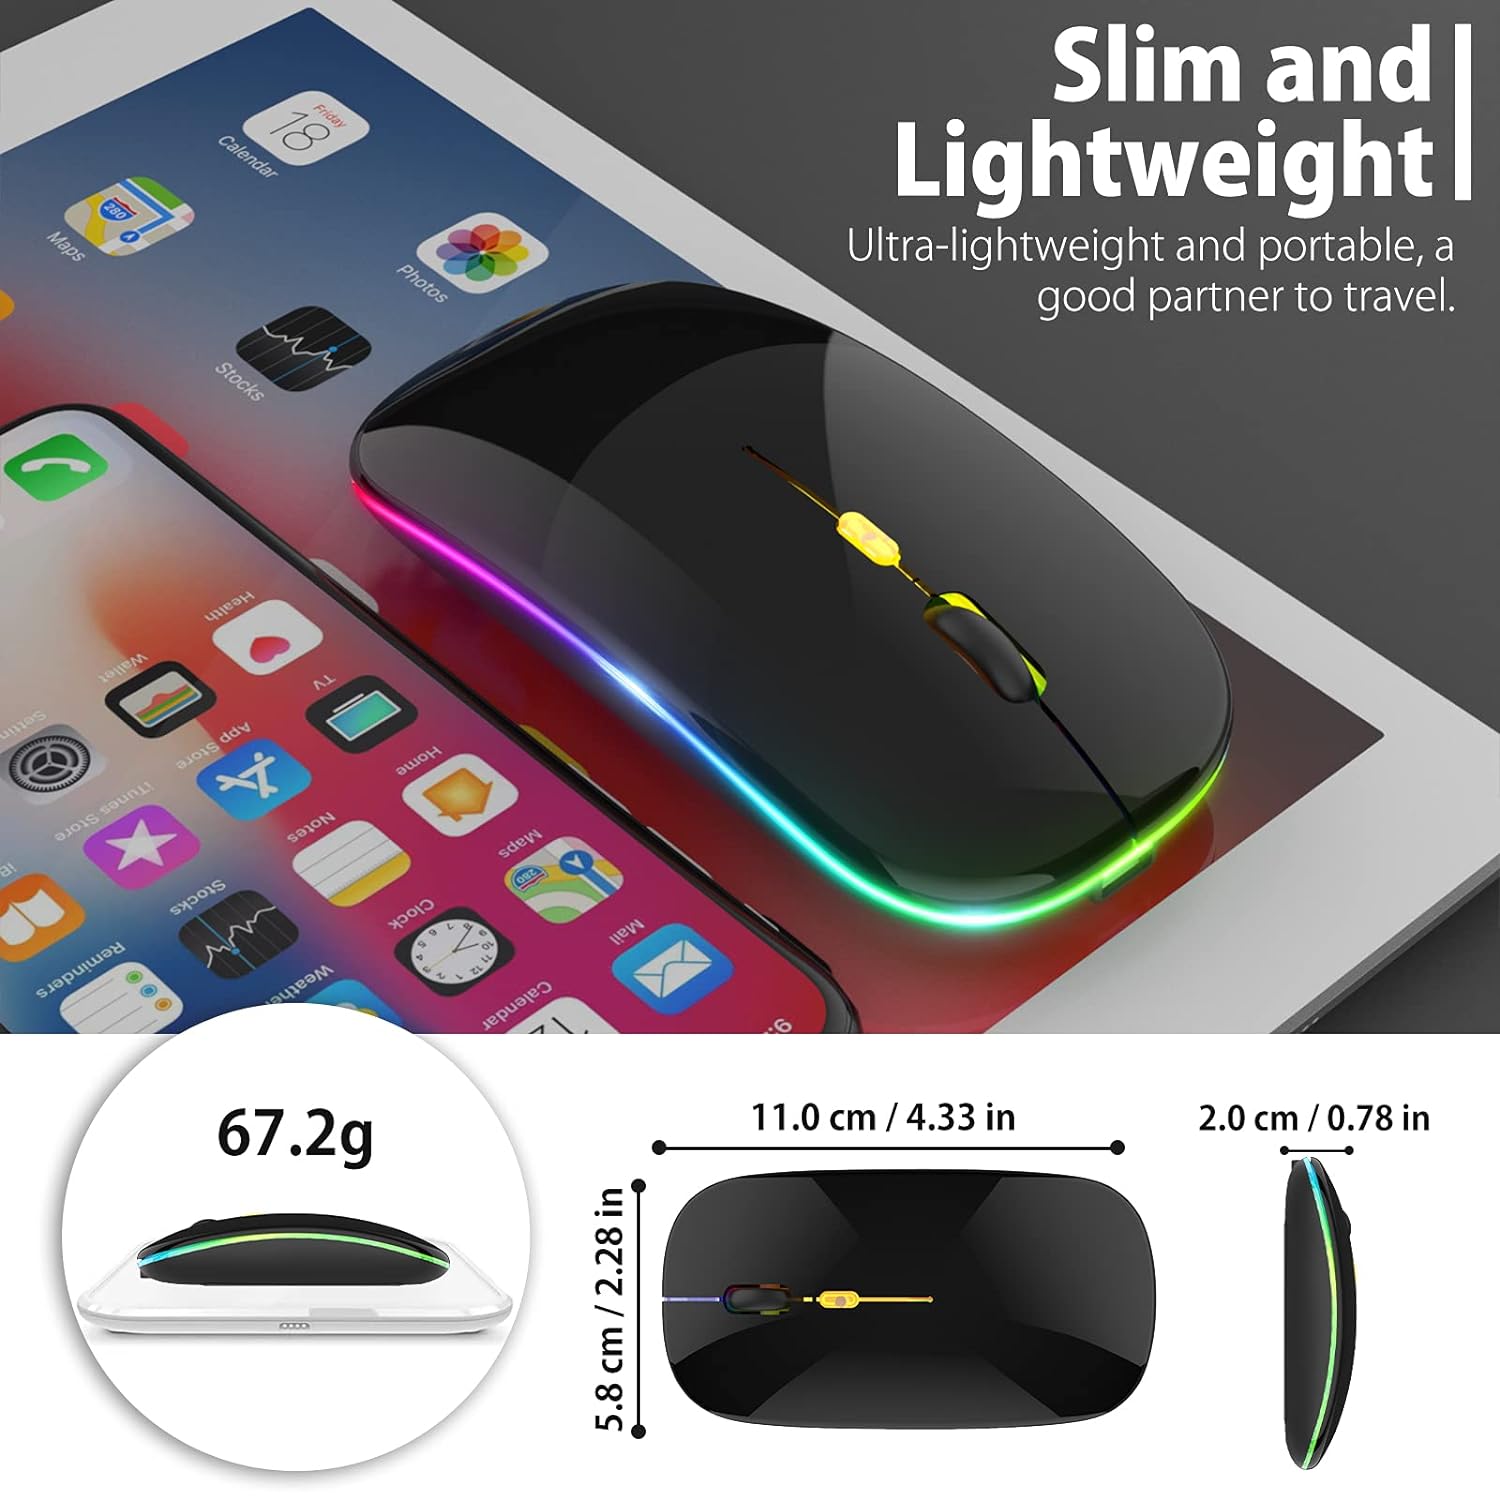 【Upgrade】LED Wireless Mouse, Slim Silent Mouse 2.4G Portable Mobile Optical Office Mouse with USB & Type-c Receiver, 3 Adjustable DPI Levels for Notebook, PC, Laptop, Computer, MacBook (Bright Black)